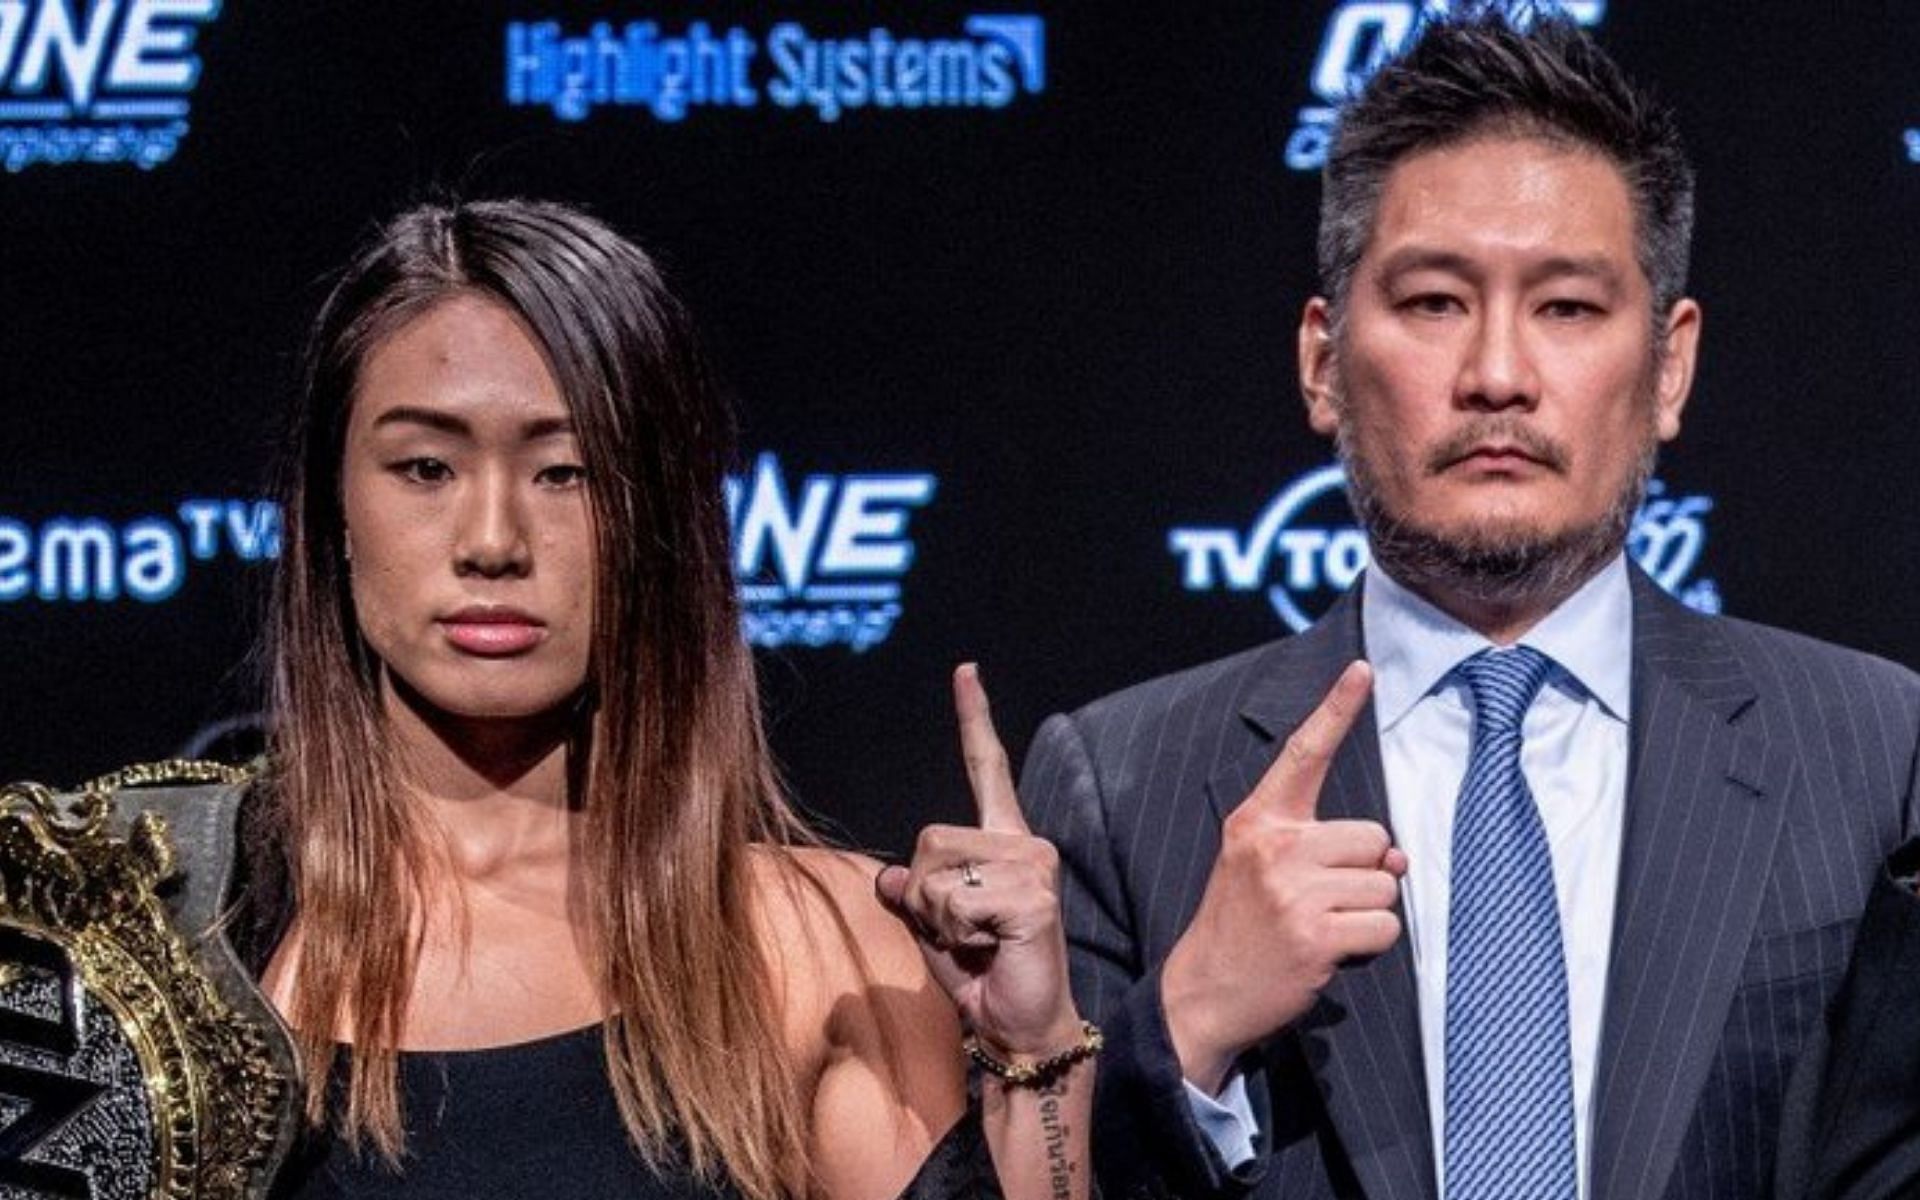 Chatri Sityodtong (right) feels that it is right for Angela Lee (left) to still become the champion after her pregnancy announcement | Photo: ONE Championship